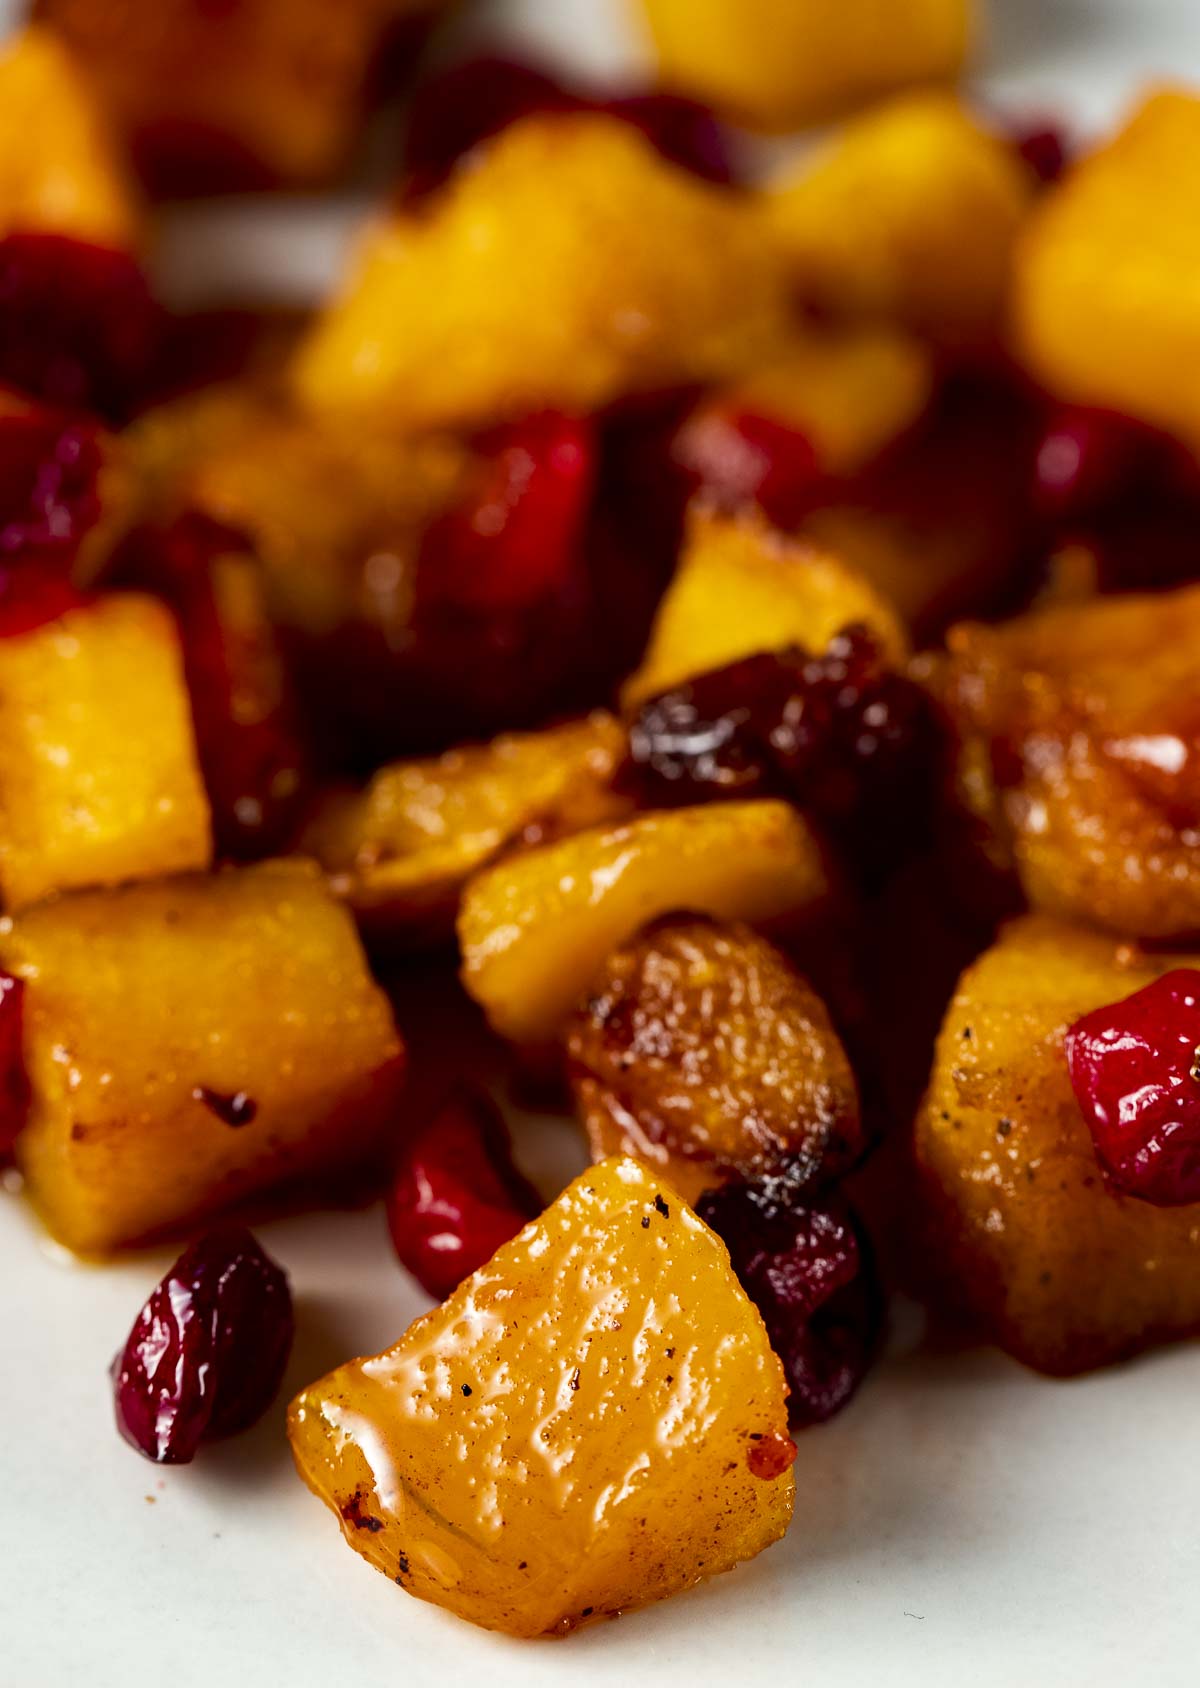 butternut squash and cranberries on a plate roasted